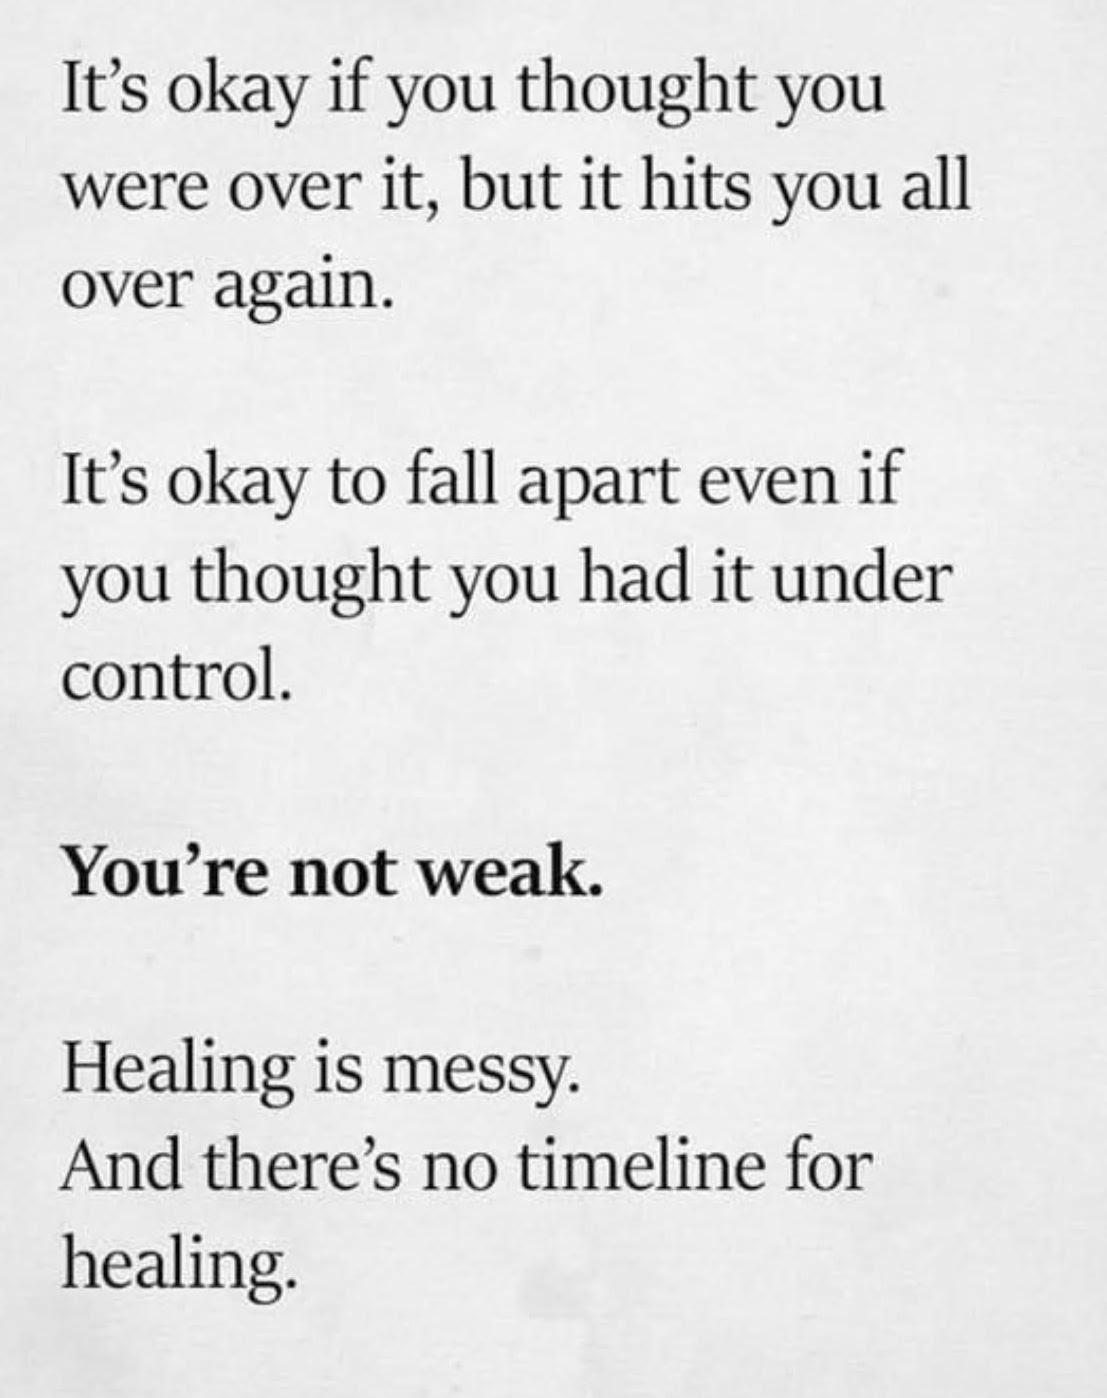 It's okay if you thought you were over it, but it hits you all over again. It's okay to fall apart even if you thought you had it under control. You're not weak.